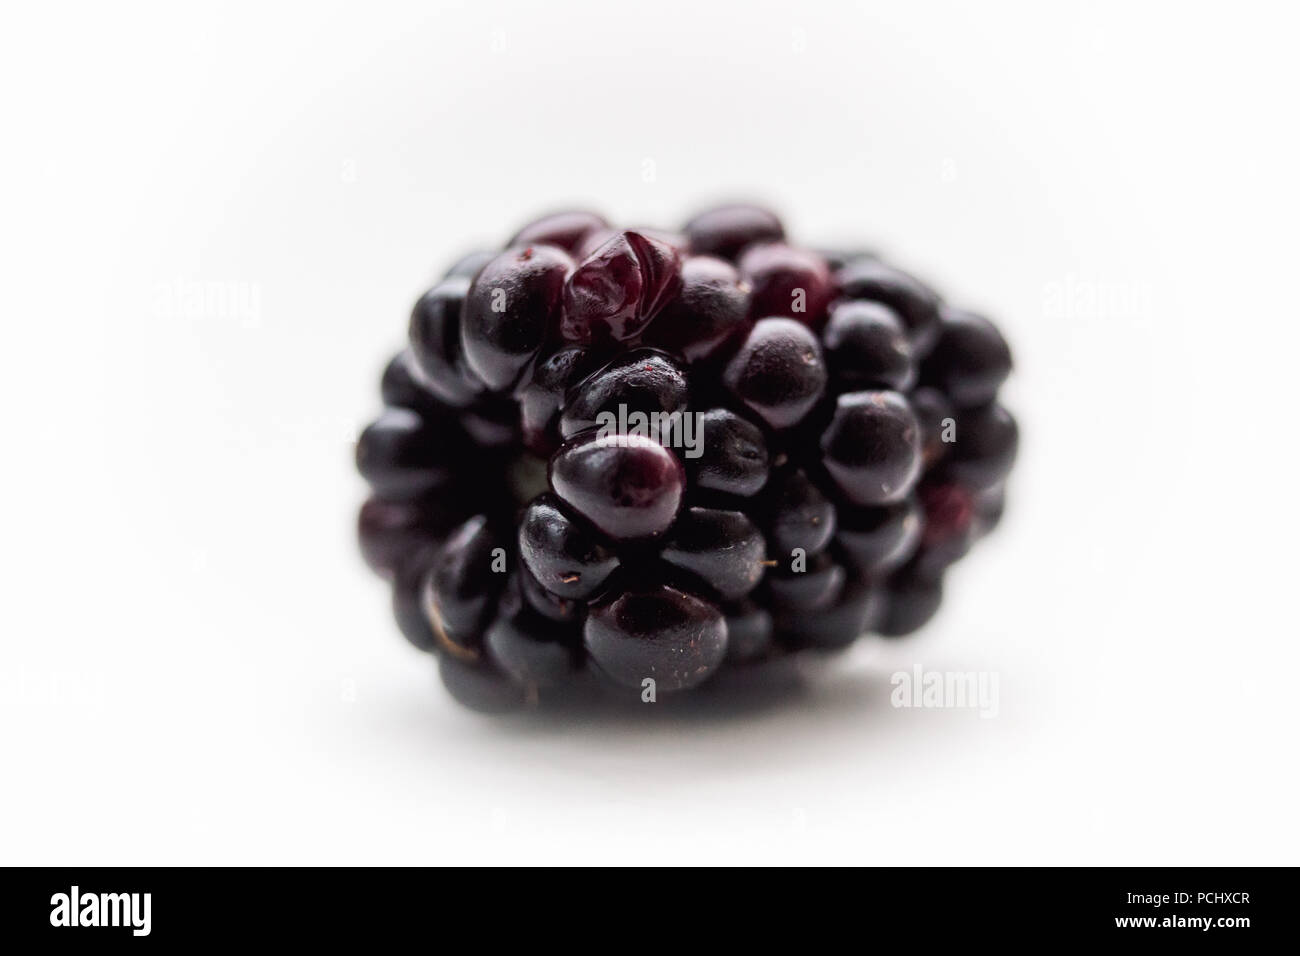 One blackberry close up on a white background Stock Photo